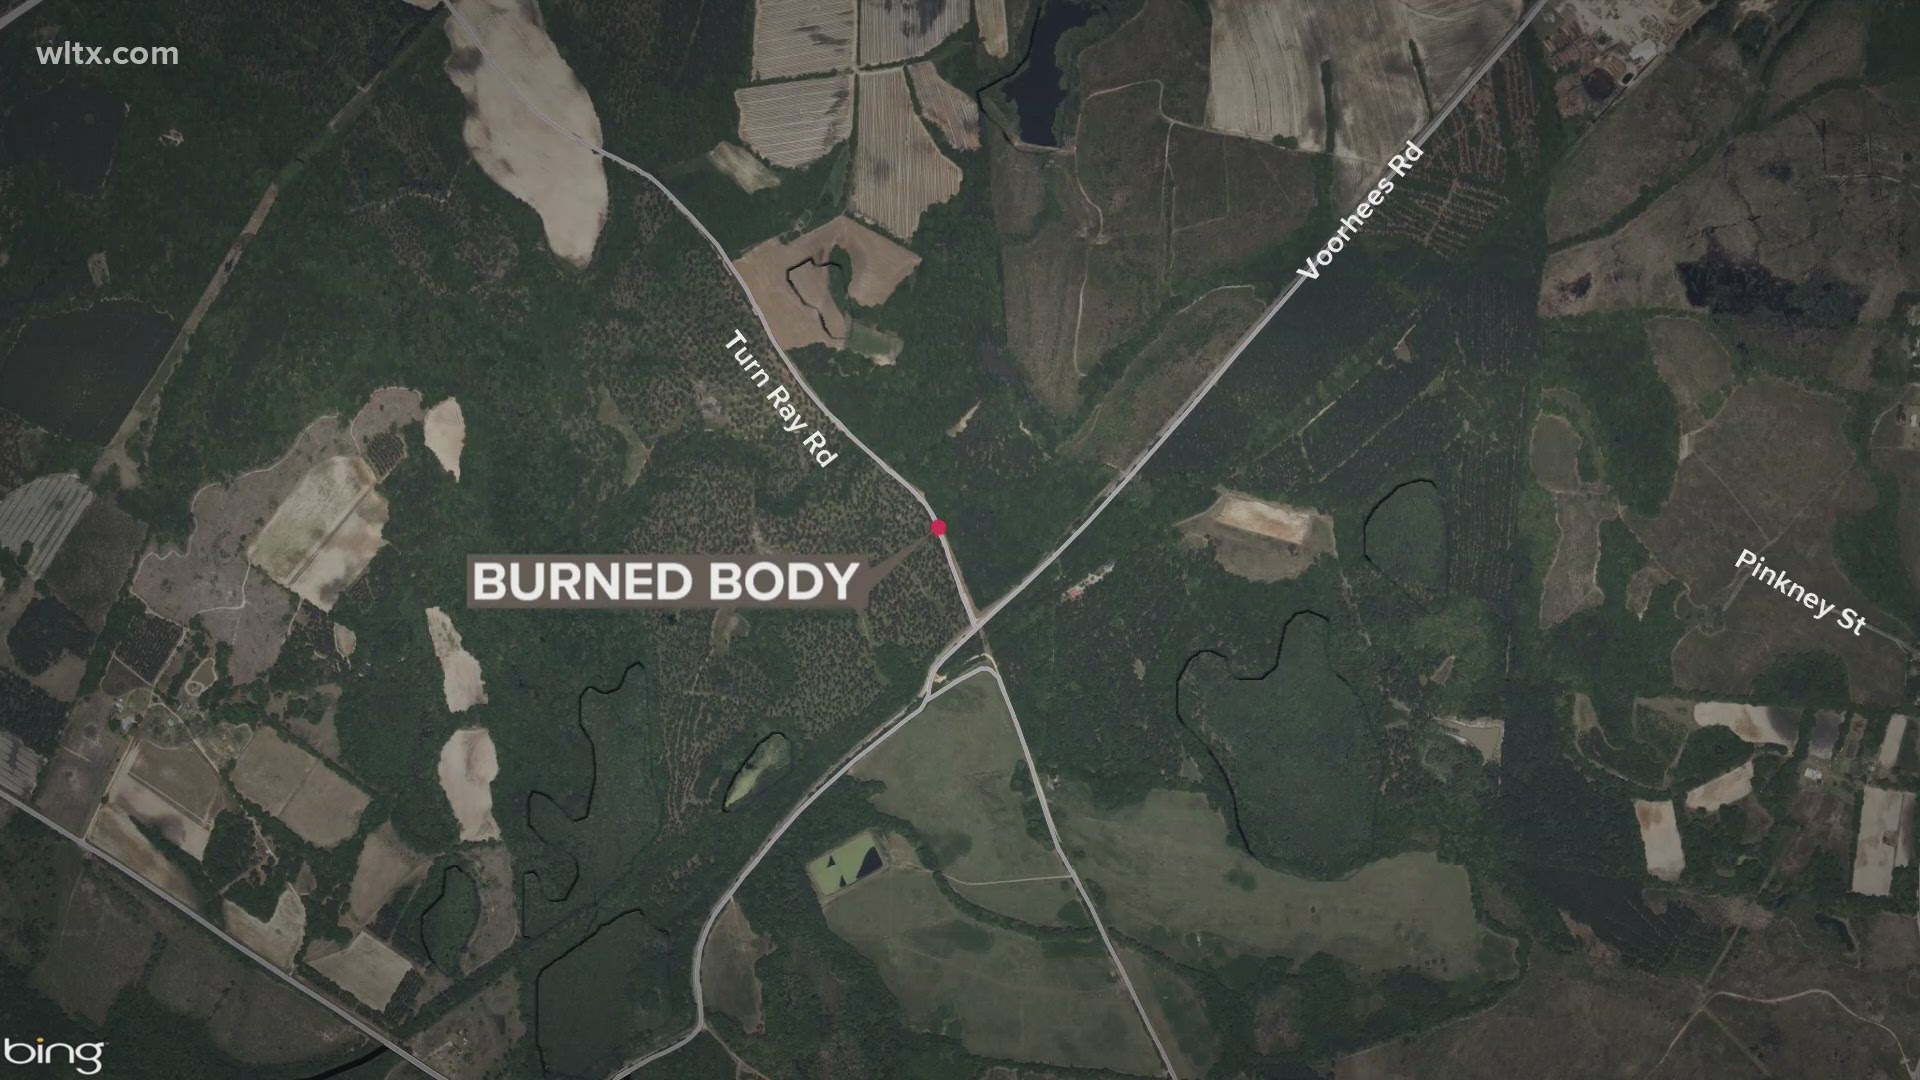 The remains were found in Bamberg county.